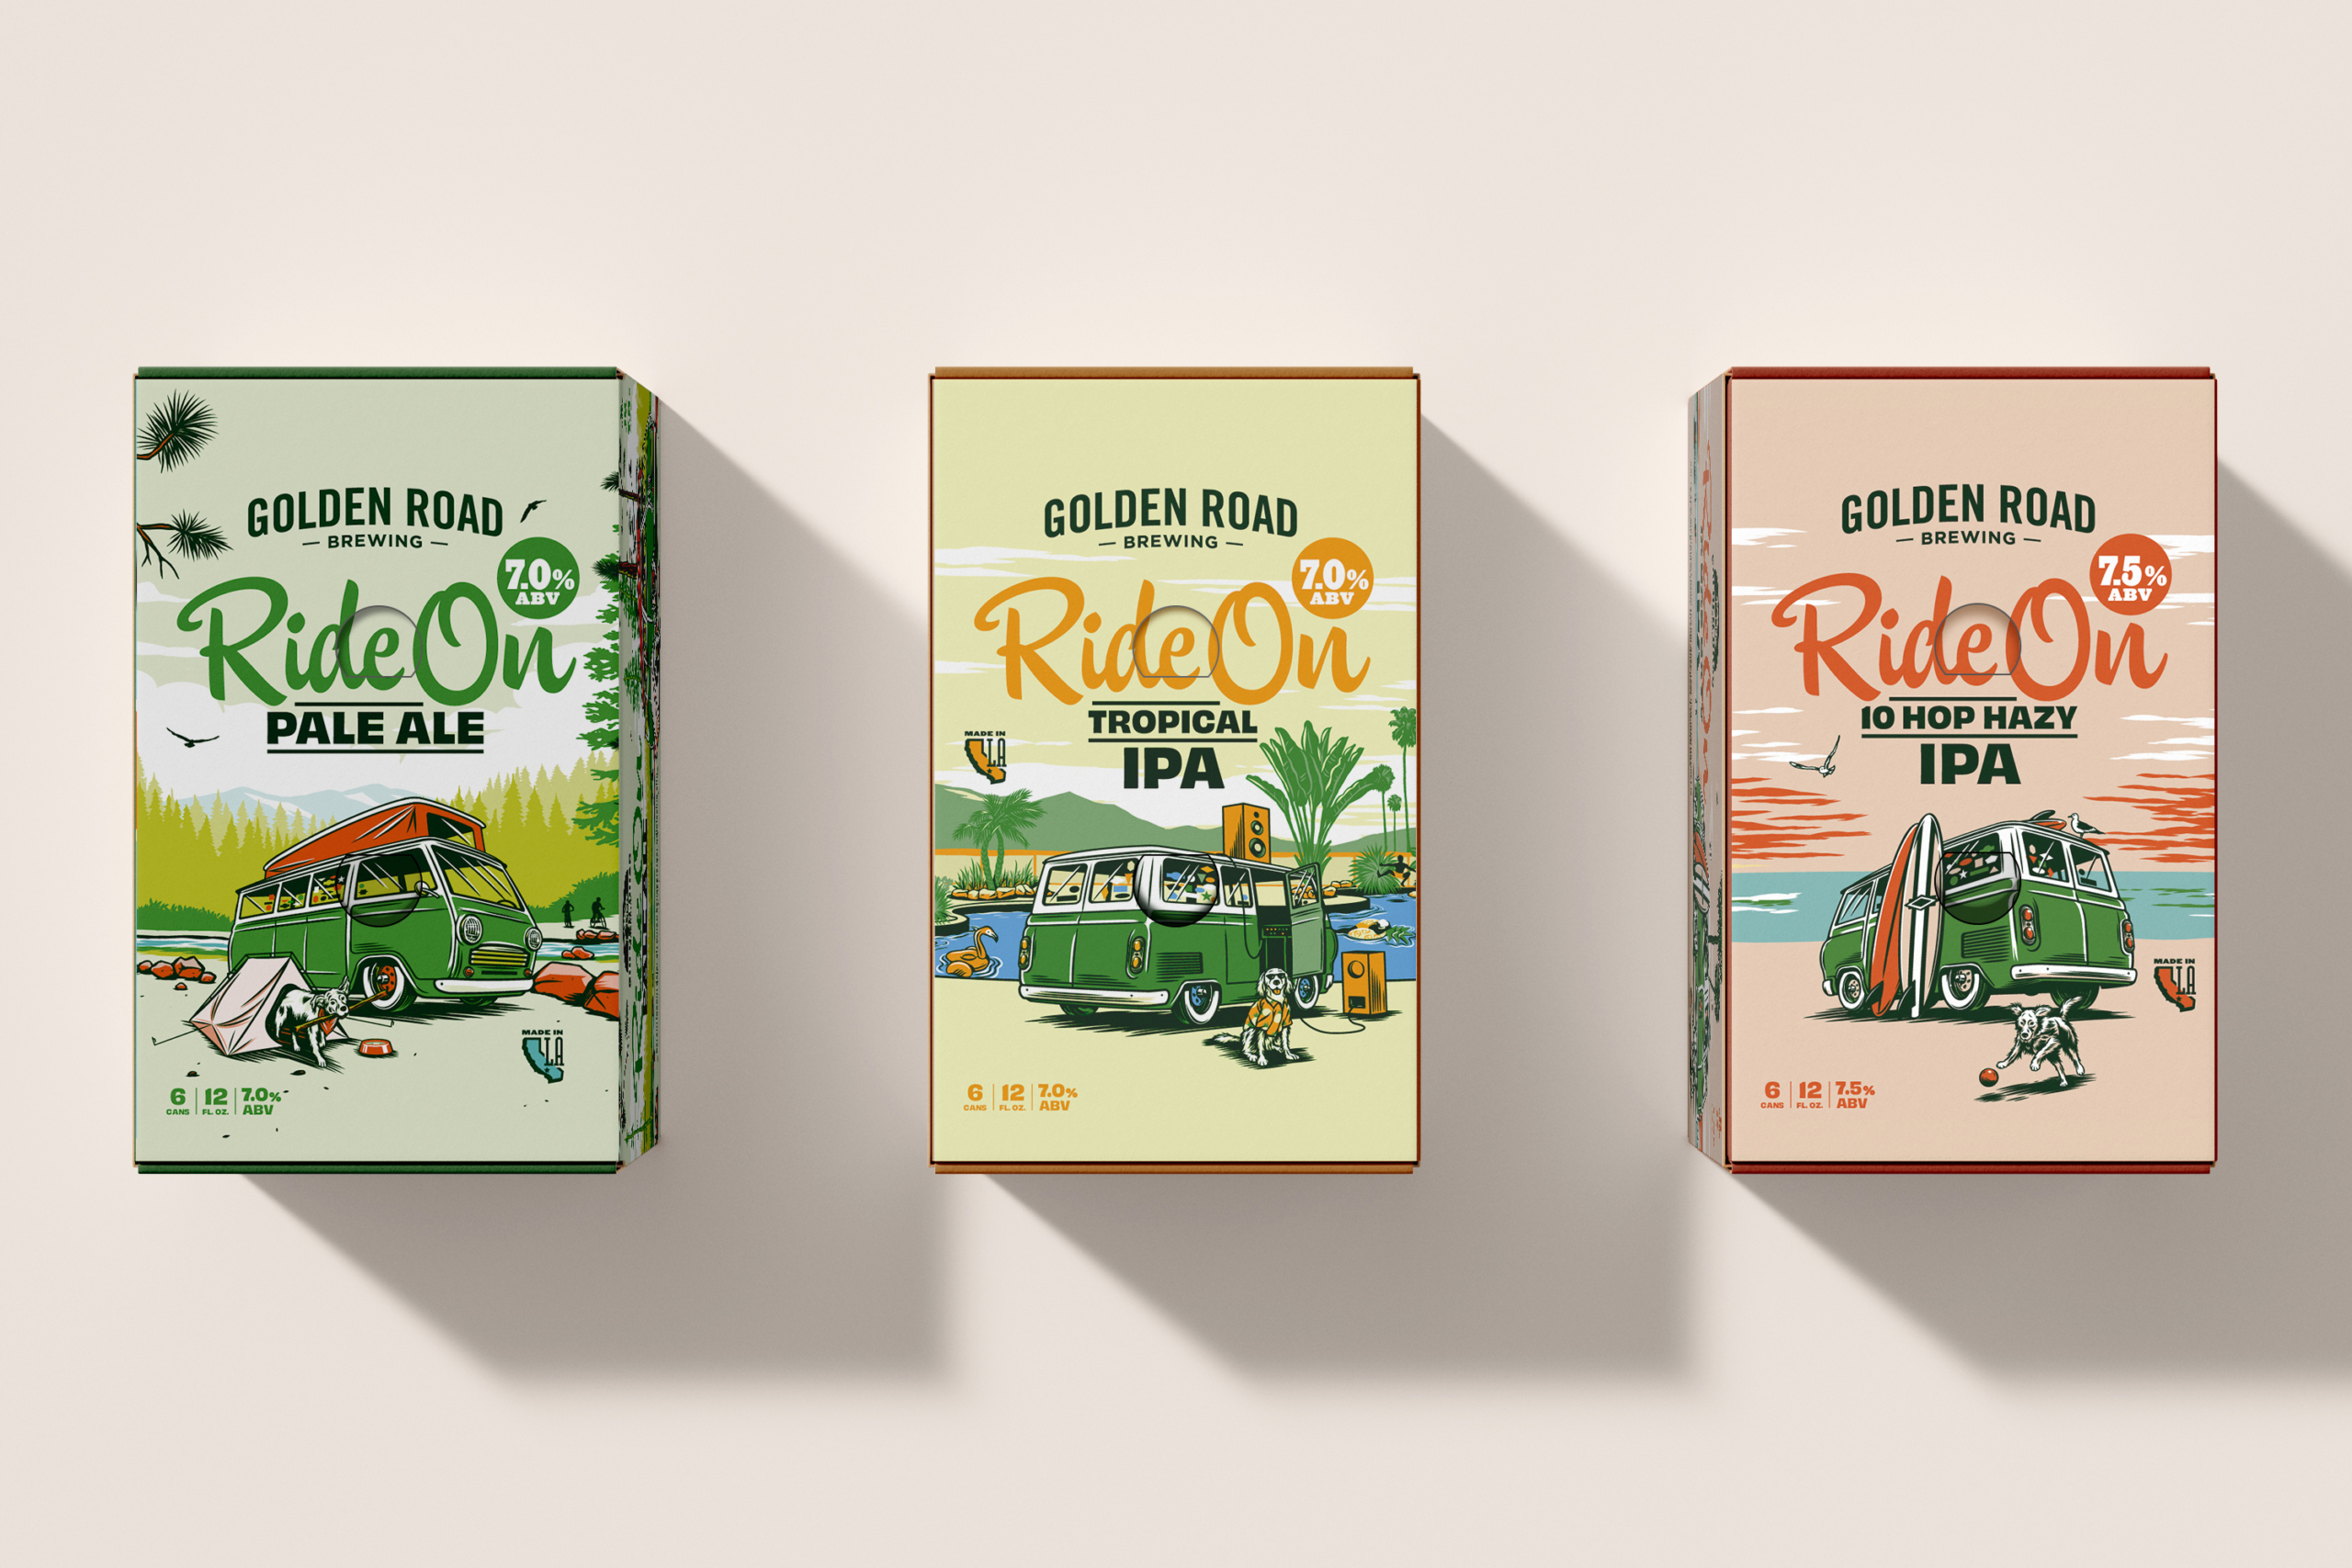 Three cases of Golden Road Ride On beer sit on a neutral beige background. Each shows the same vintage green van parked in various outdoor locations around the state of California: mountains, pool side, and beach. The cases are green for Pale Ale, yellow for Tropical IPA, and pink for 10 Hop Hazy IPA.